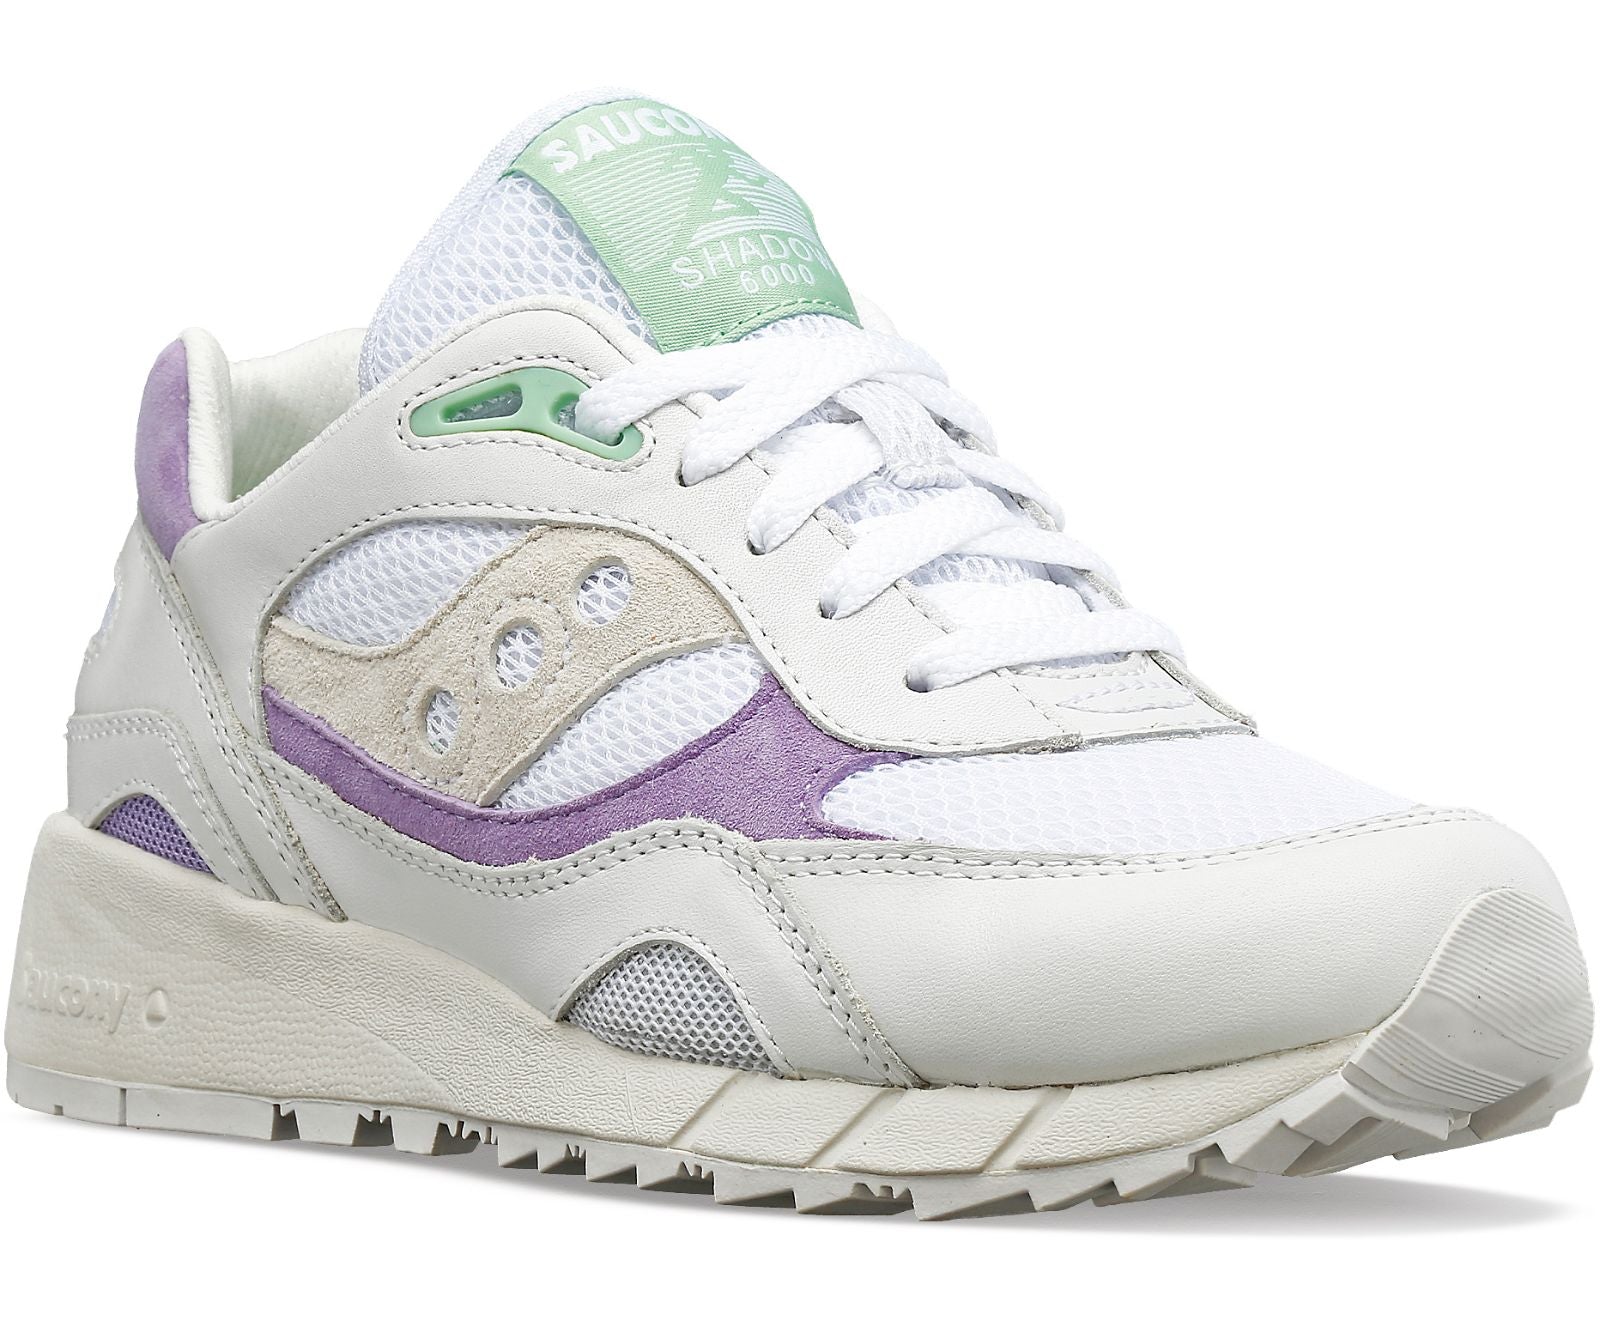 This white bsed Women's Shadow 6000 has a lot of fashion appeal